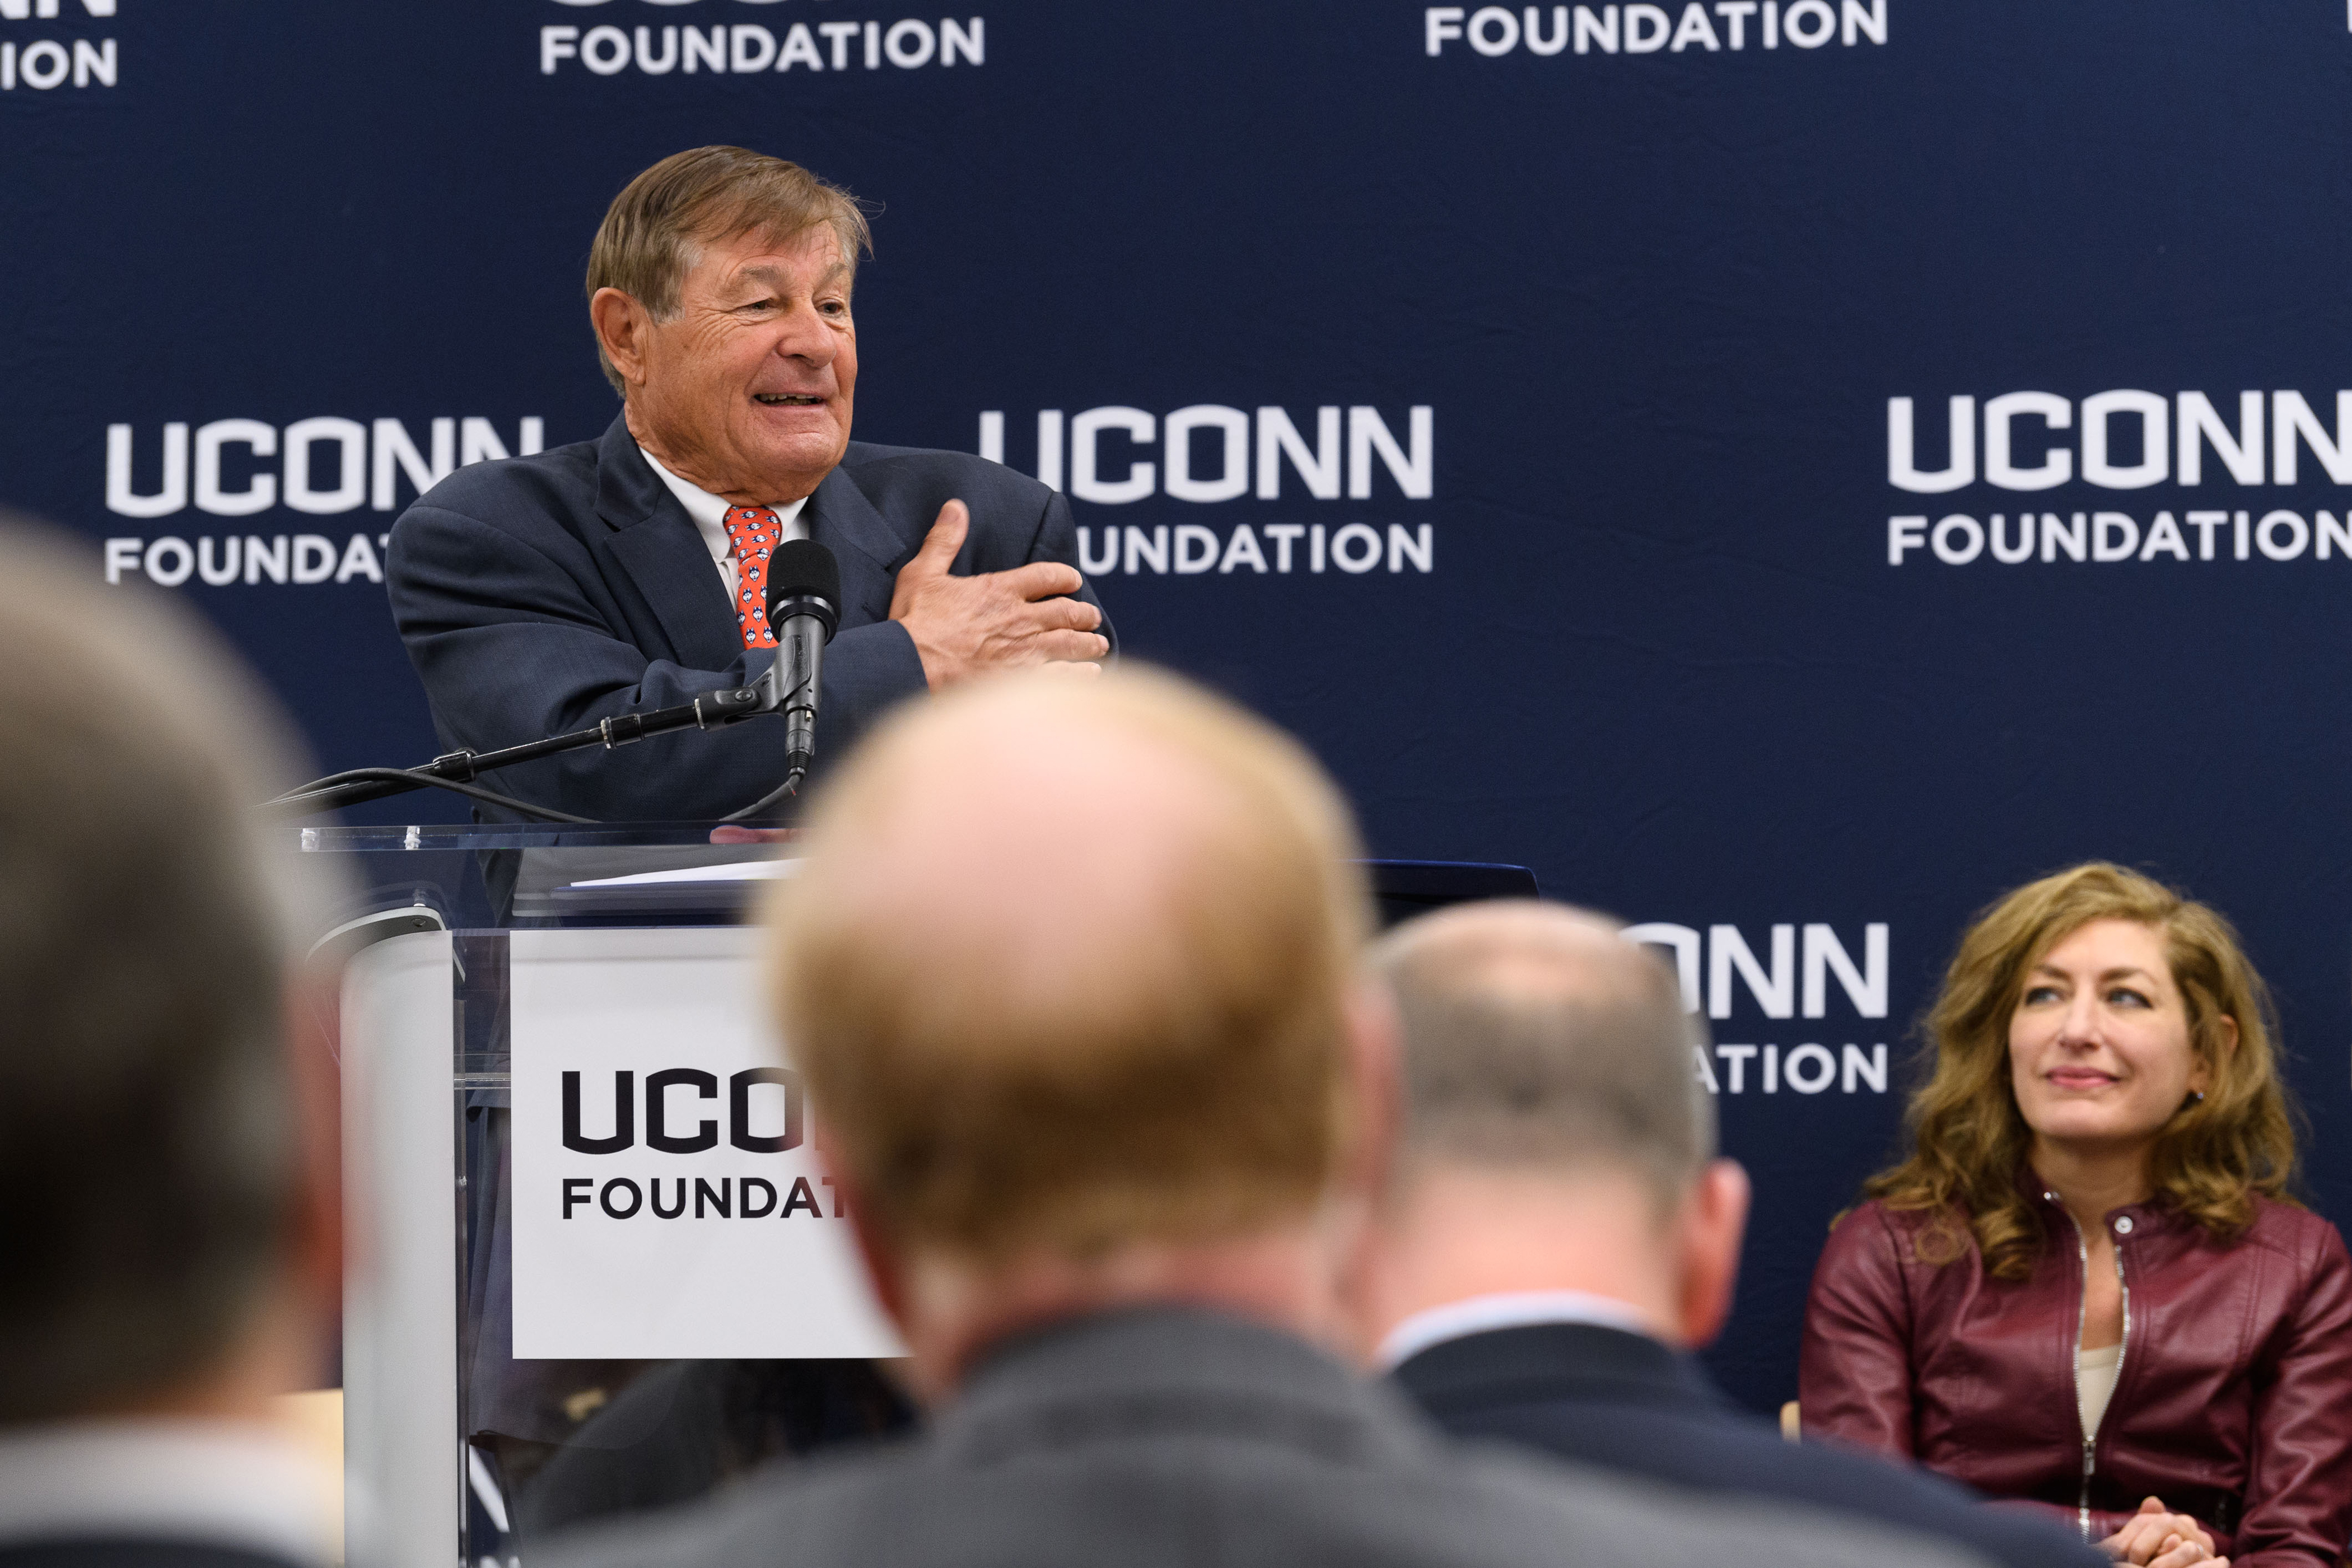 Peter J. Werth speaks at an event to announce his $22.5 million commitment to the University and the naming of the Peter J. Werth Residence Tower on Dec. 4, 2017. Seated is President Susan Herbst. (Peter Morenus/UConn Photo)